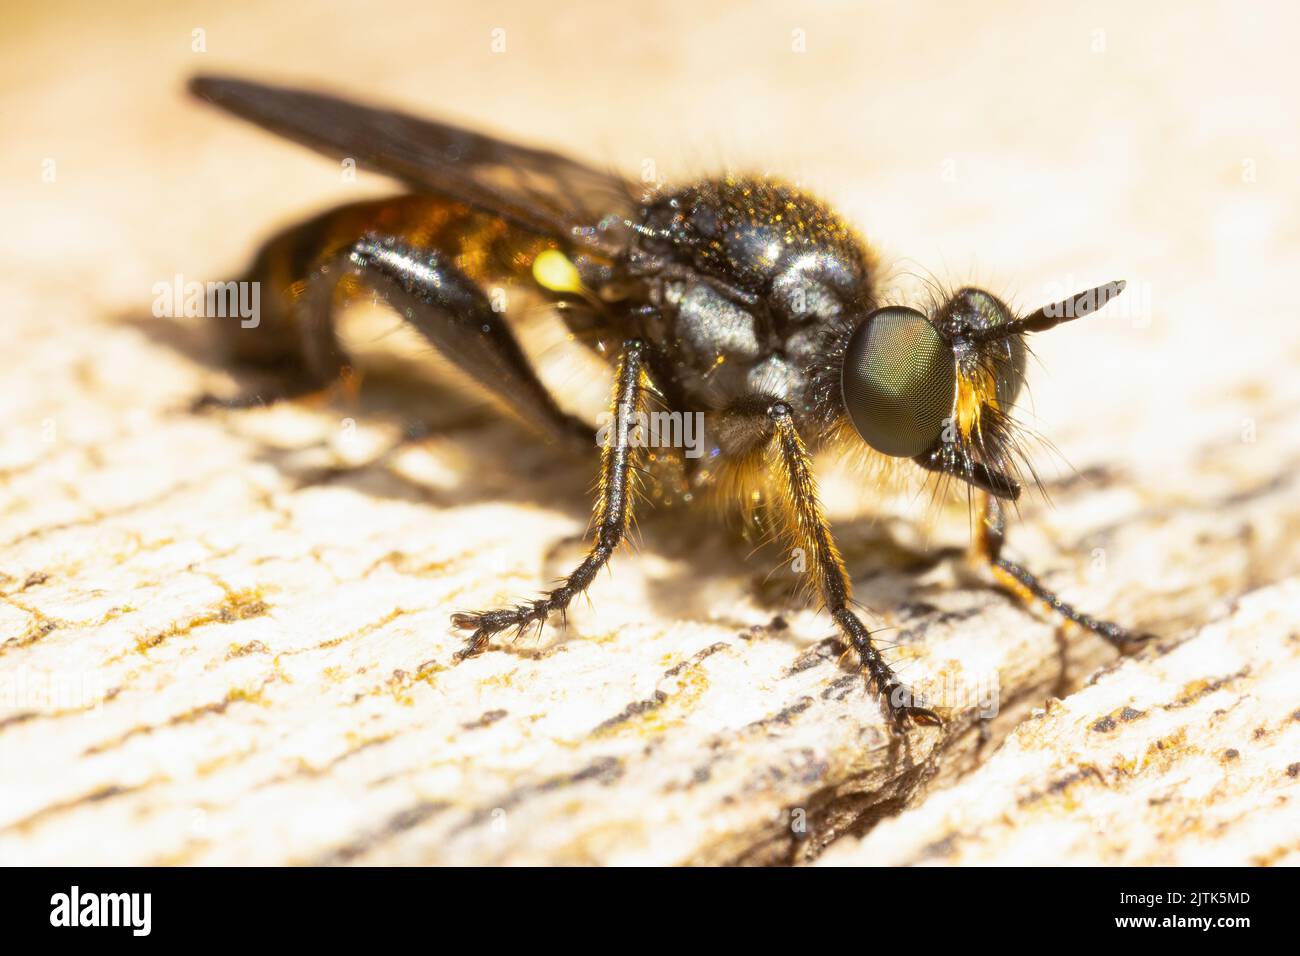 Close up of a golden-haired robber fly. A small species within this group of highly manoeuvrable predatory insects. Stock Photo